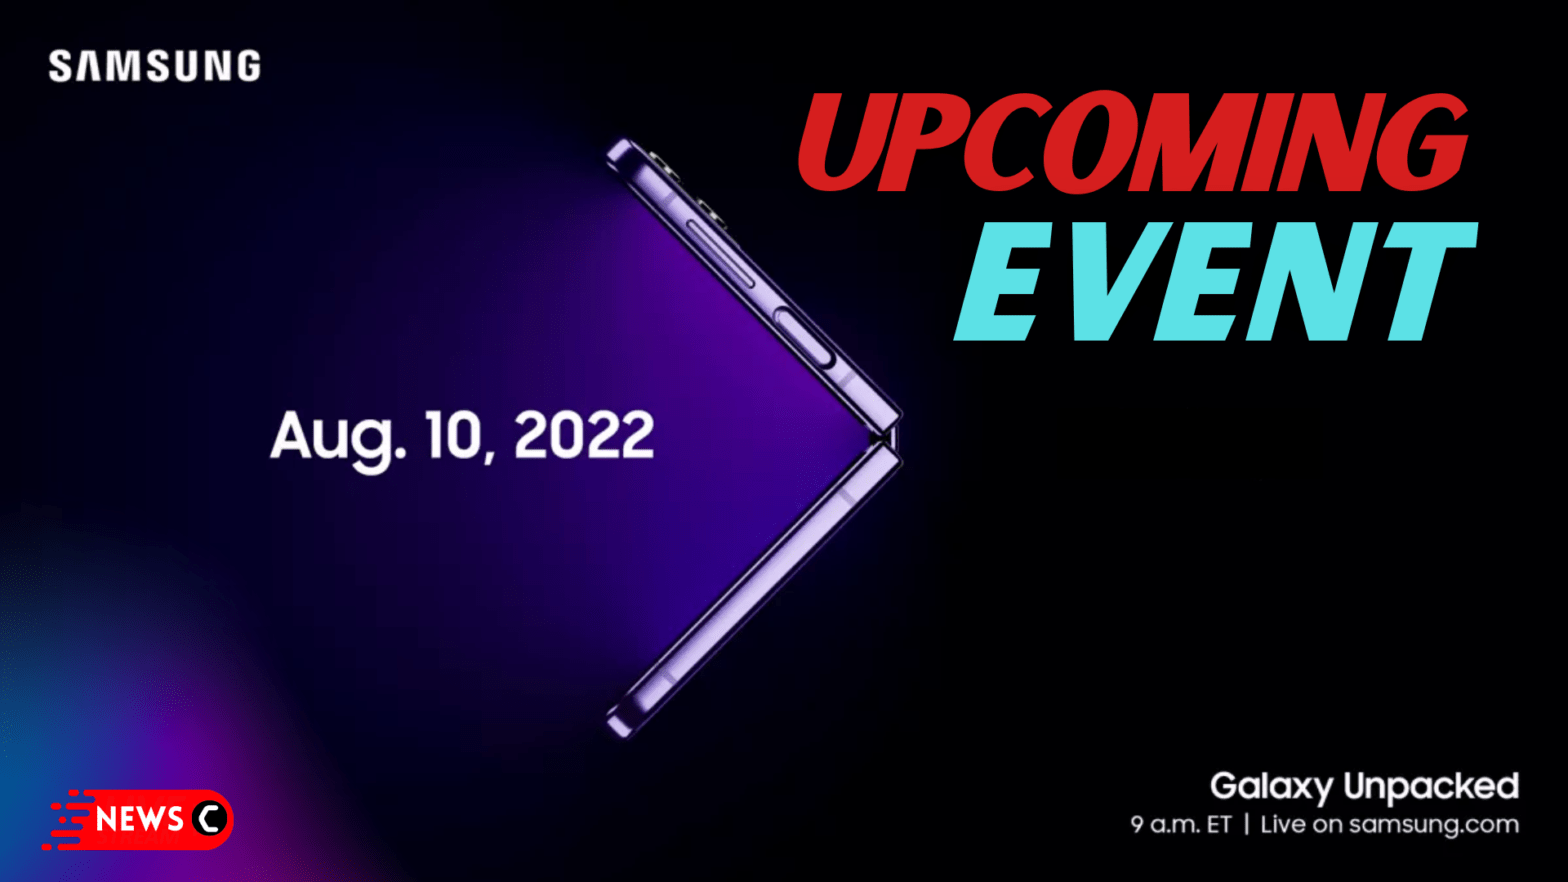 Samsung Galaxy Unpacked Event? What Can We Expect?